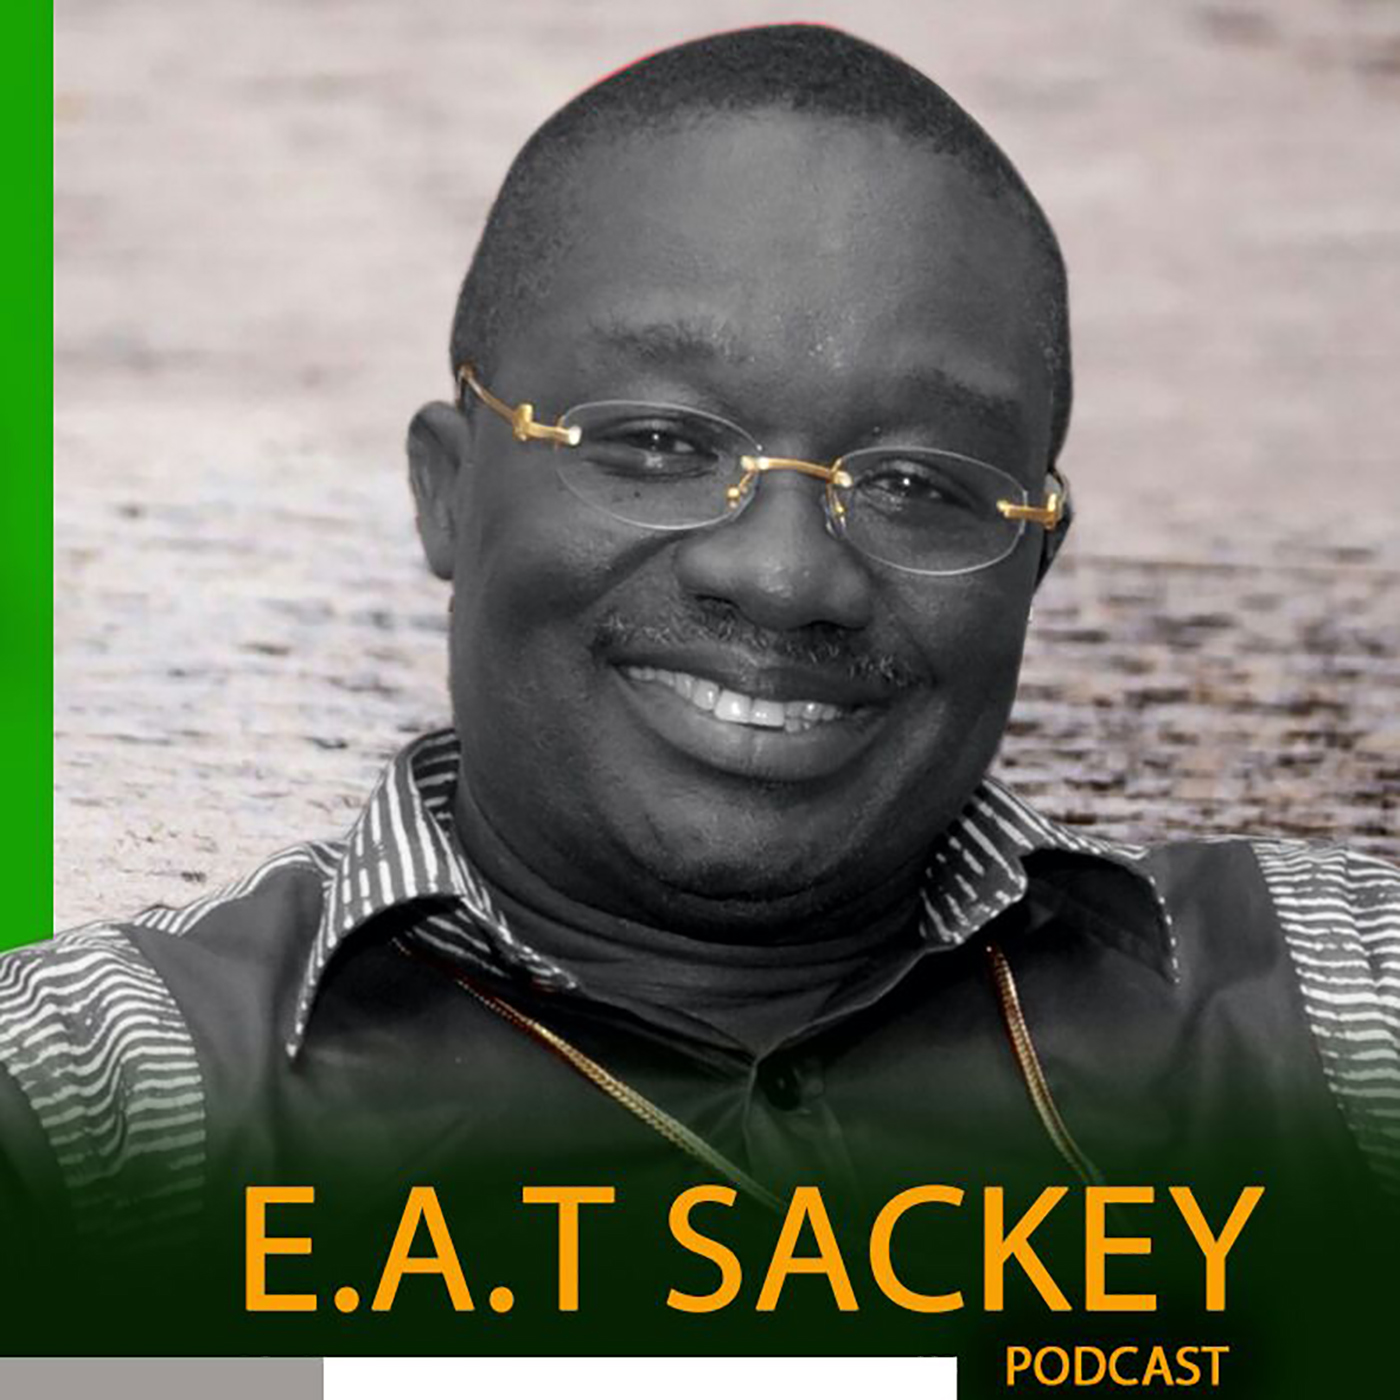 I AM PART OF A BIG STORY - BISHOP E. A. T. SACKEY